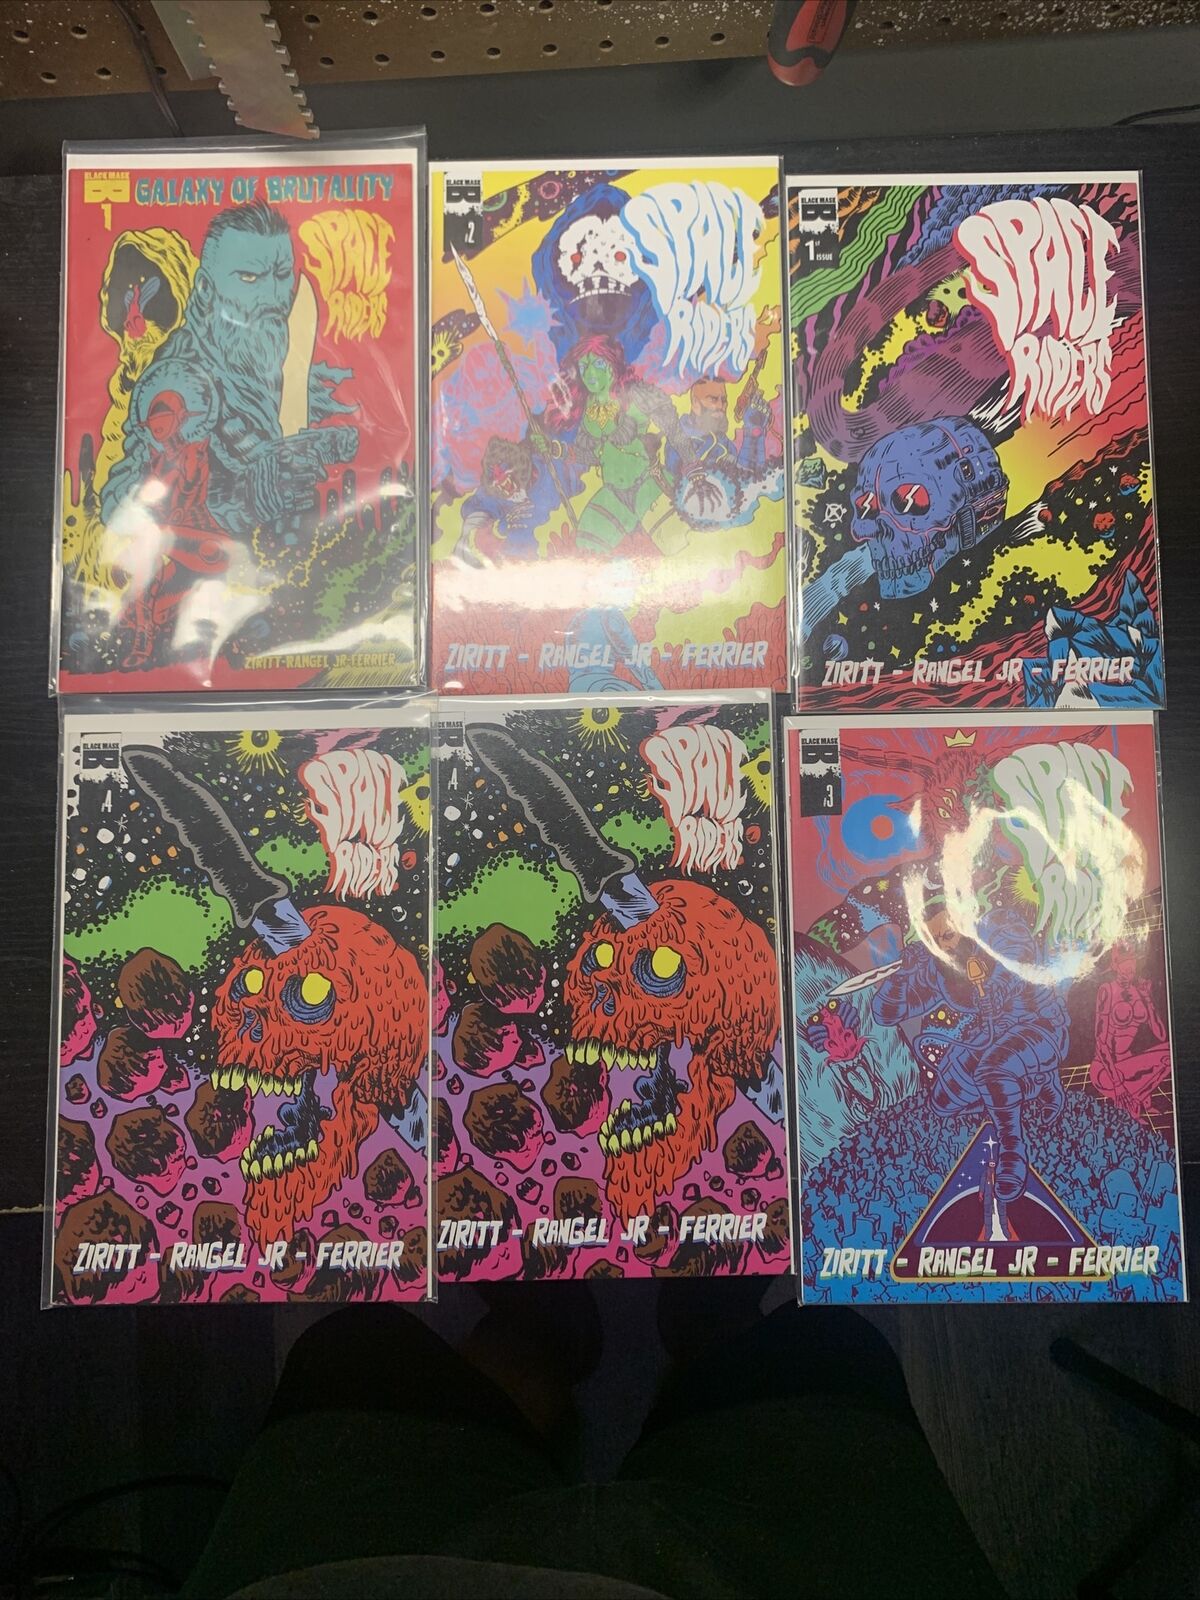 Space Riders 1-4+ hardcover + Galaxy Of Brutality #1 Black mask comics